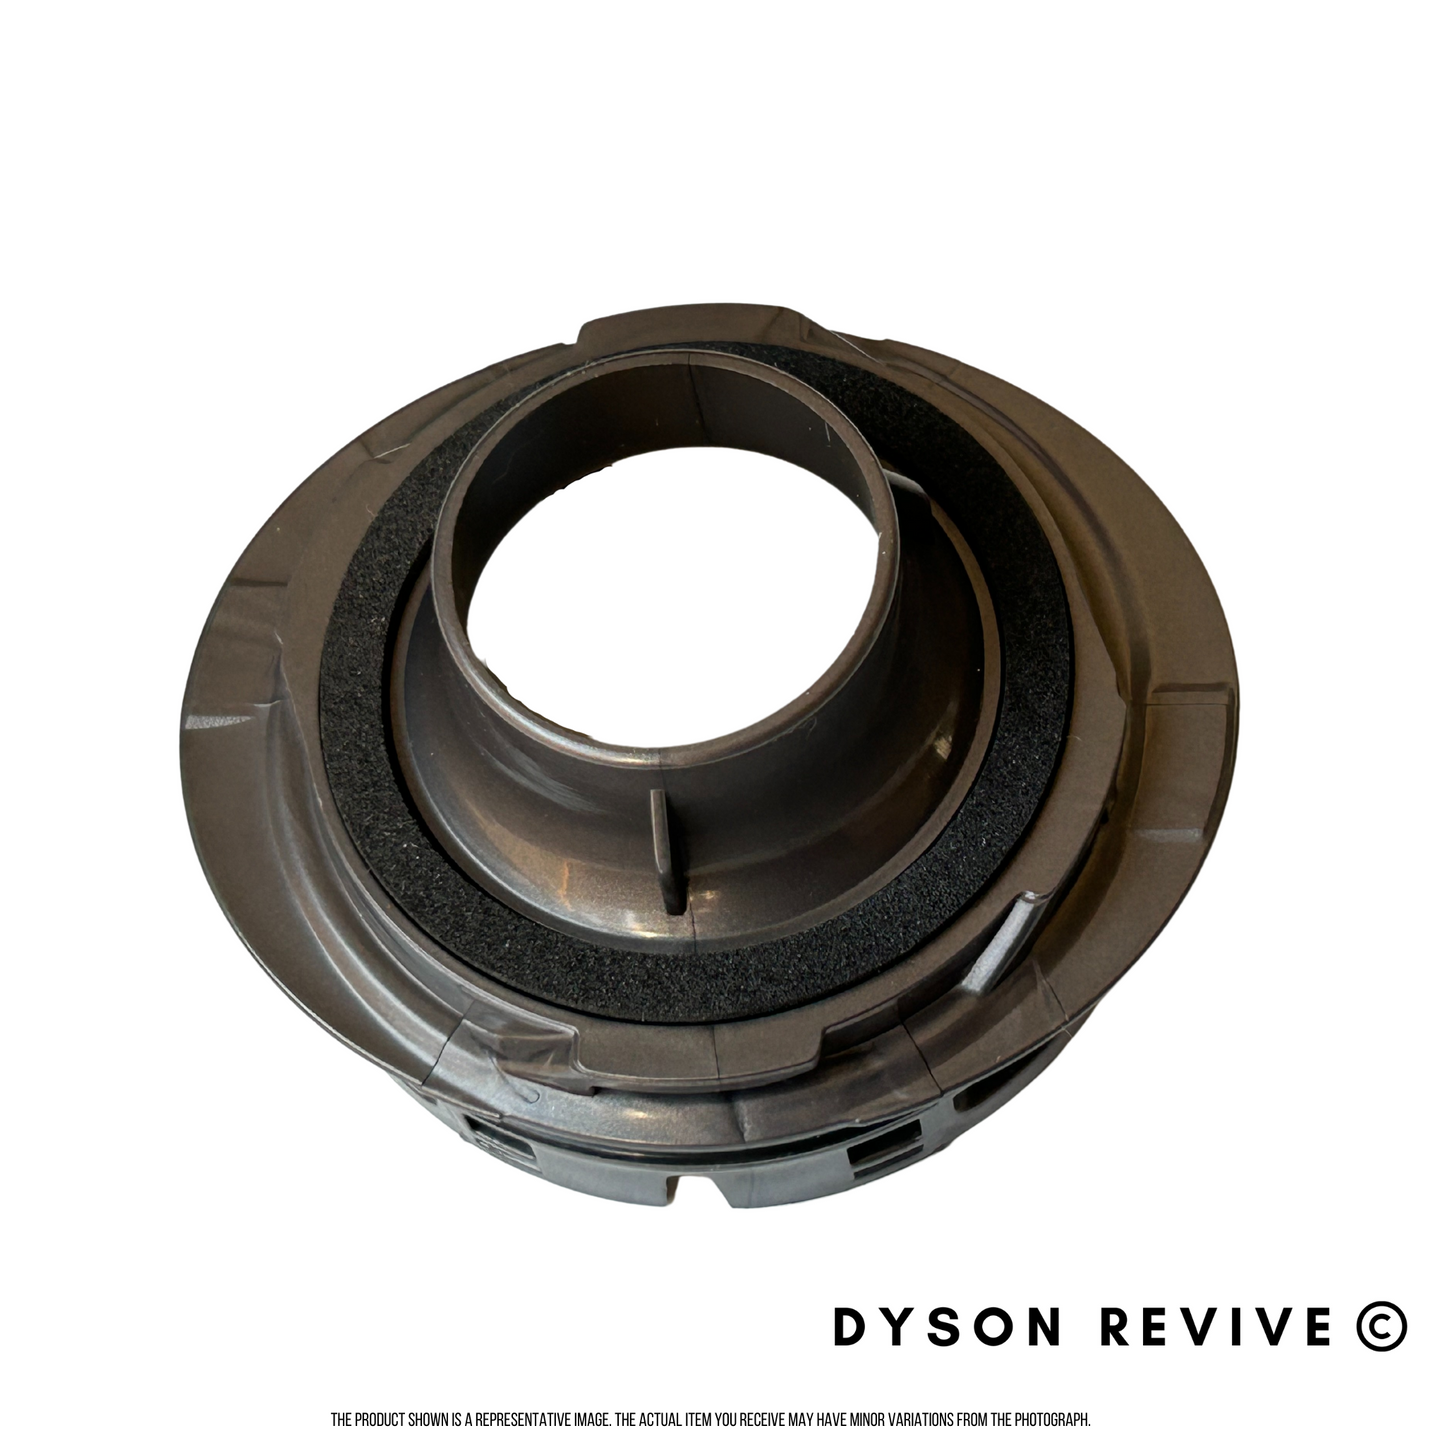 Motor Rear Cover Replacement for Dyson V7 V8 Vacuum Cleaner Accessories - Dyson Revive